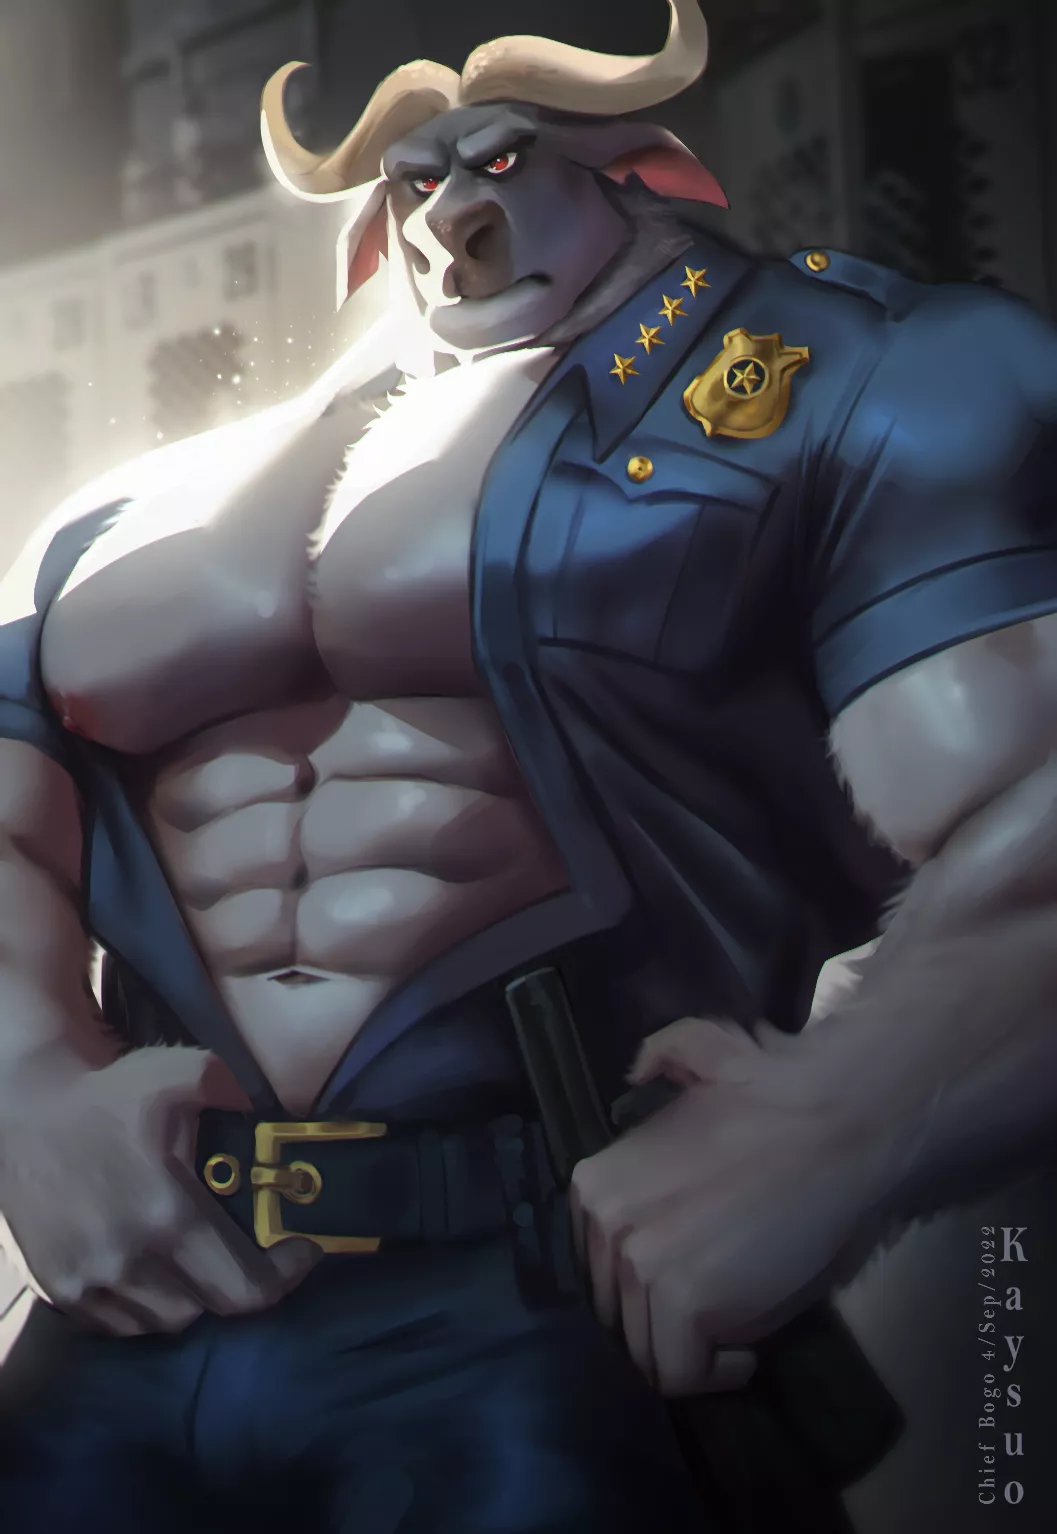 1057px x 1534px - Chief Bogo (Zootopia) [Kaysuo] nudes by KaysuoAE